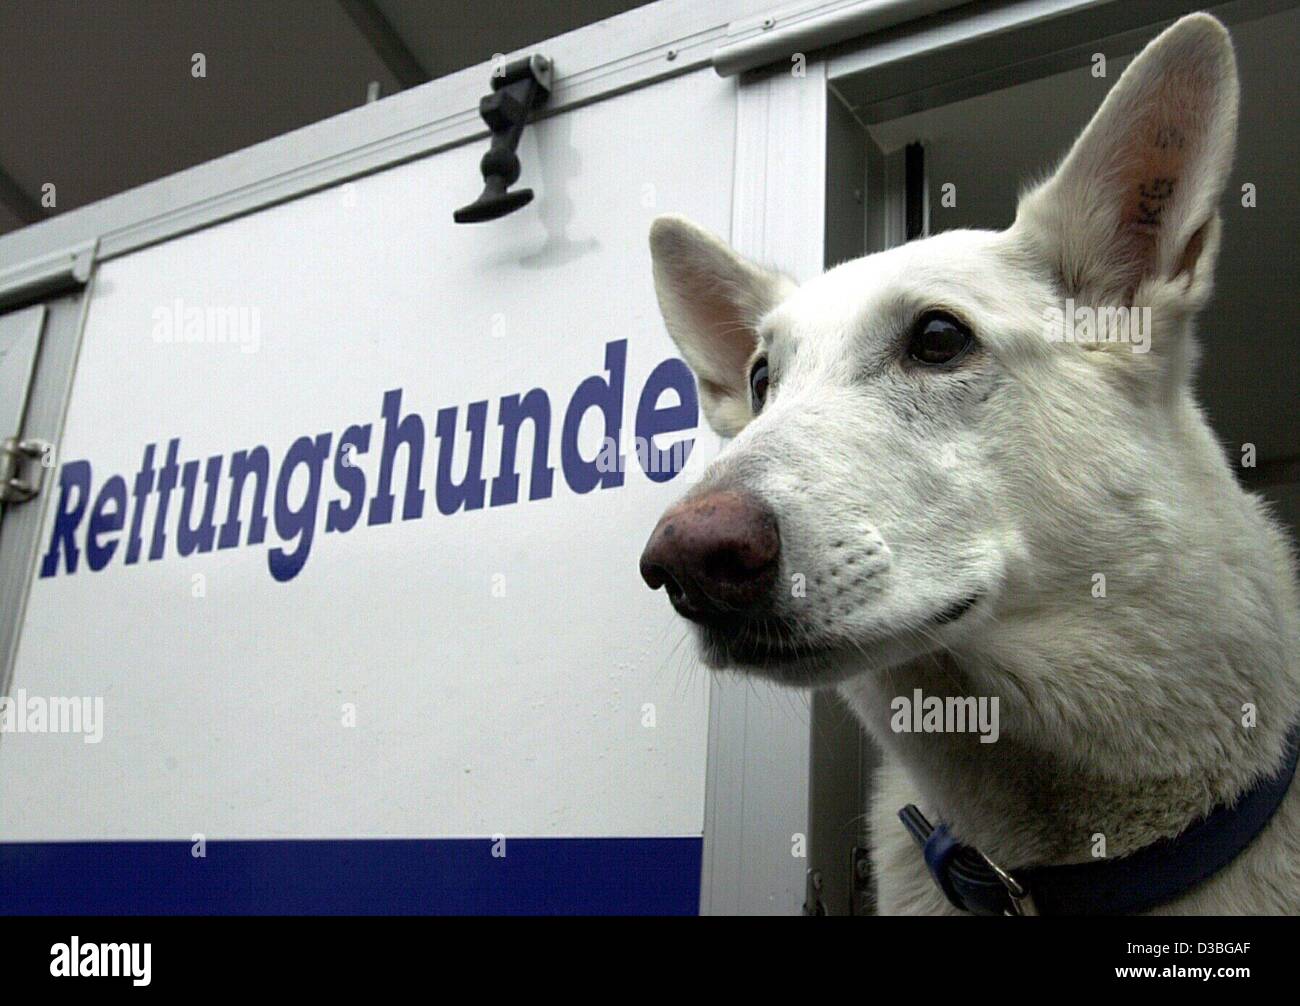 (dpa) - The white shepherd dog Candy, specially trained by the German Technisches Hilfswerk (Technical Emergency Relief Service) to find victims, waits for its flight to Algeria, in Frankfurt, 22 May 2003. The writing to its left reads 'Rettungshunde' (rescue dogs). At least 538 people were killed a Stock Photo